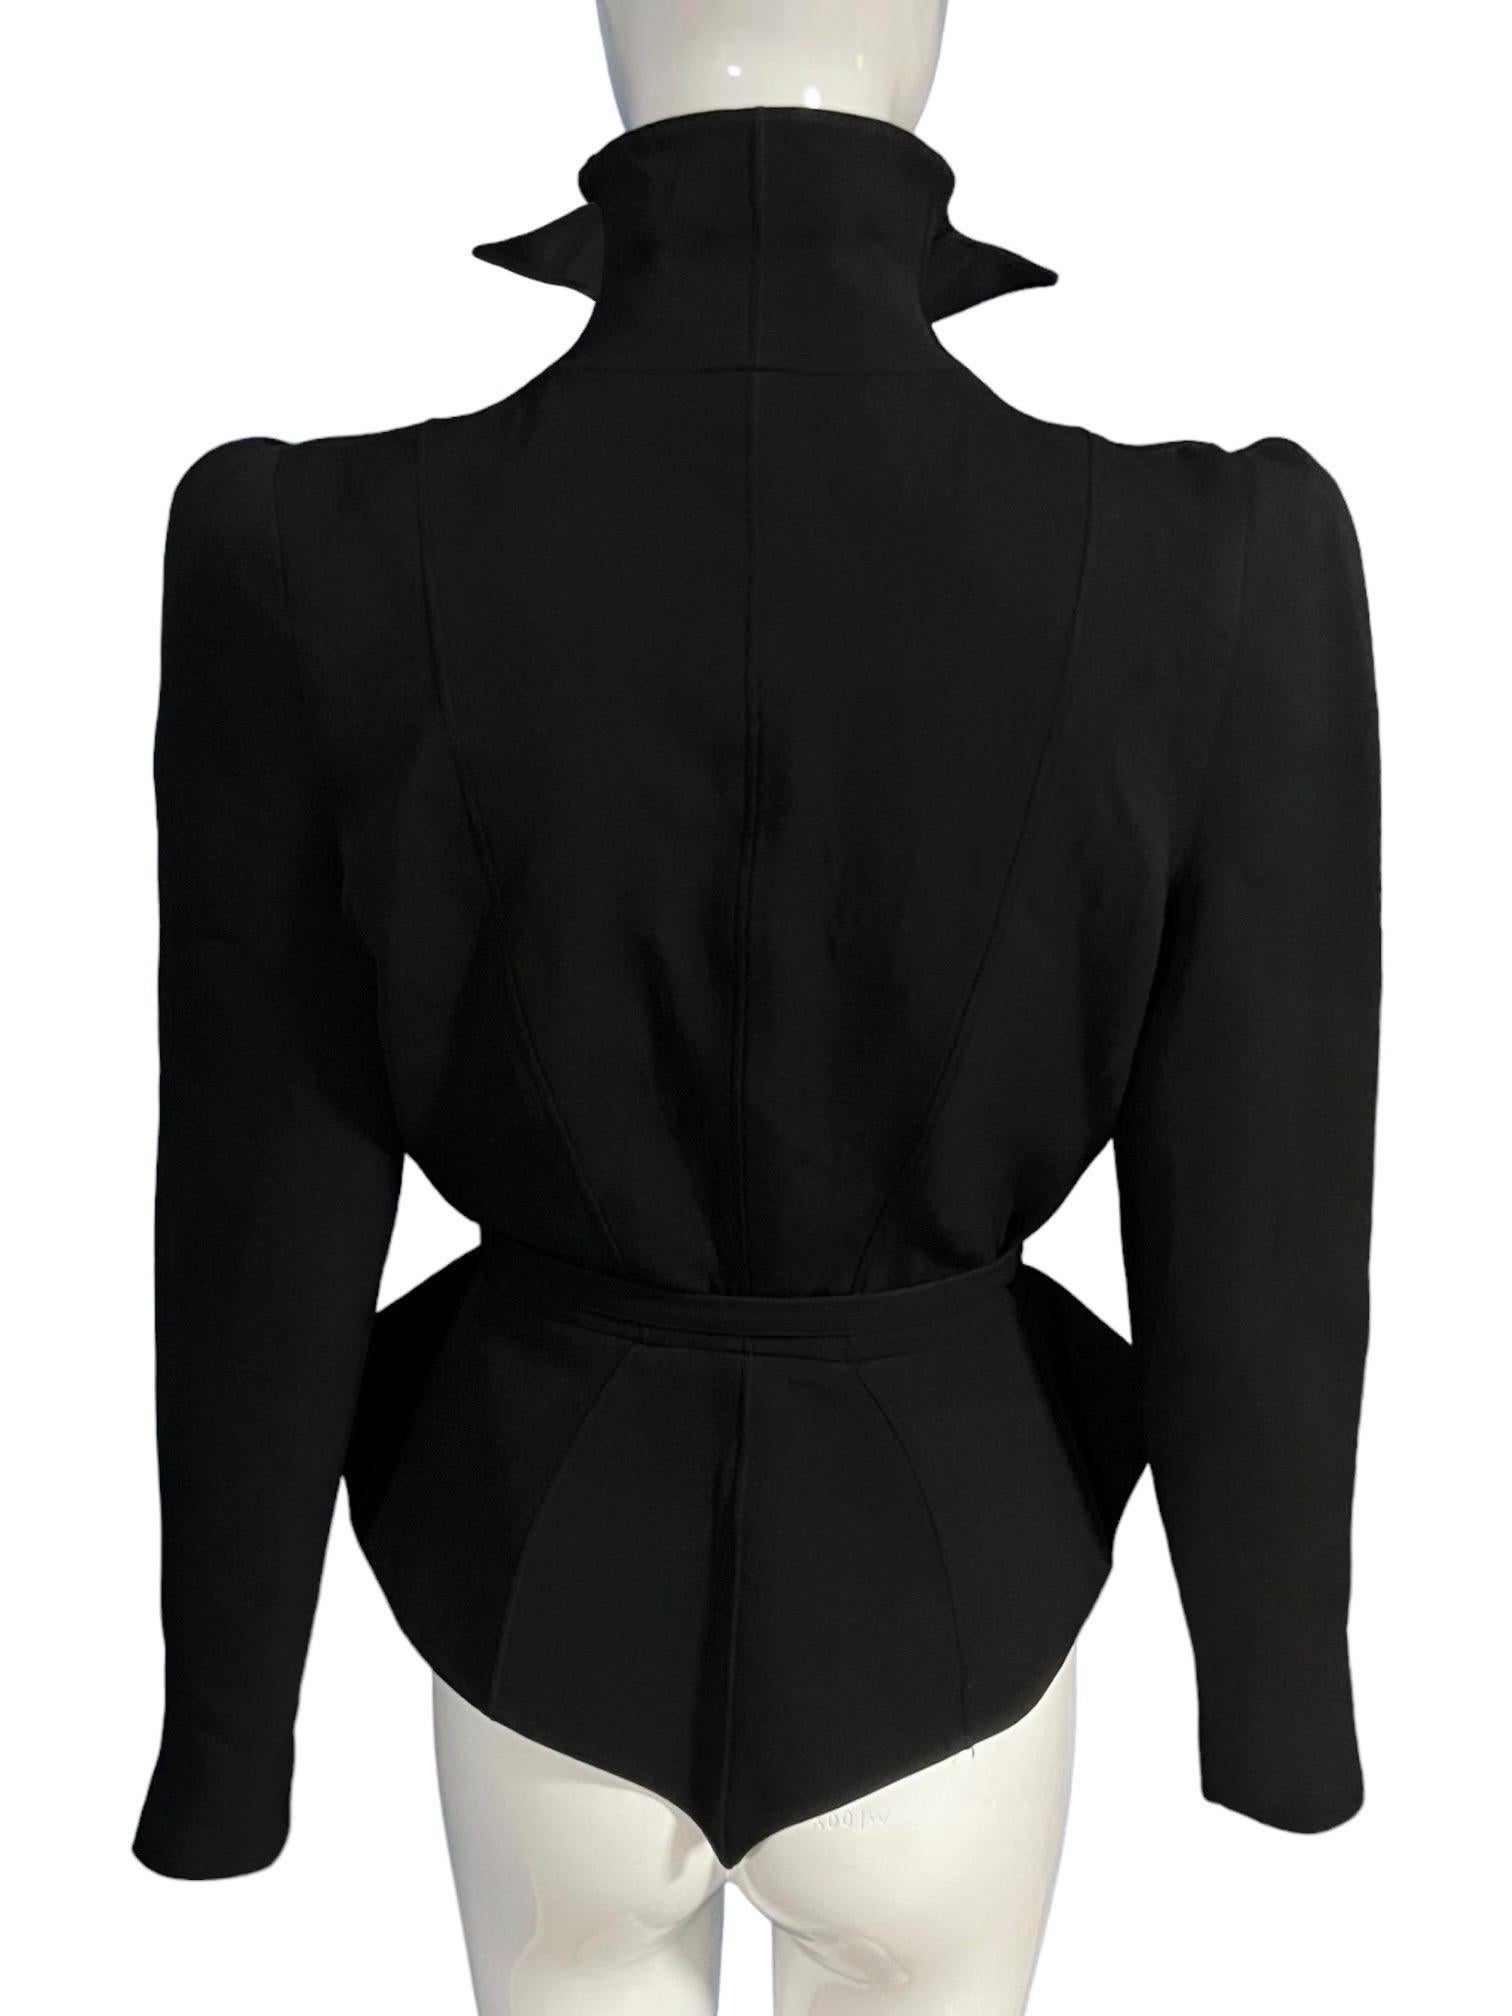 F/W 1988 Thierry Mugler Black Les Infernales Structural Runway Jacket For Sale 8